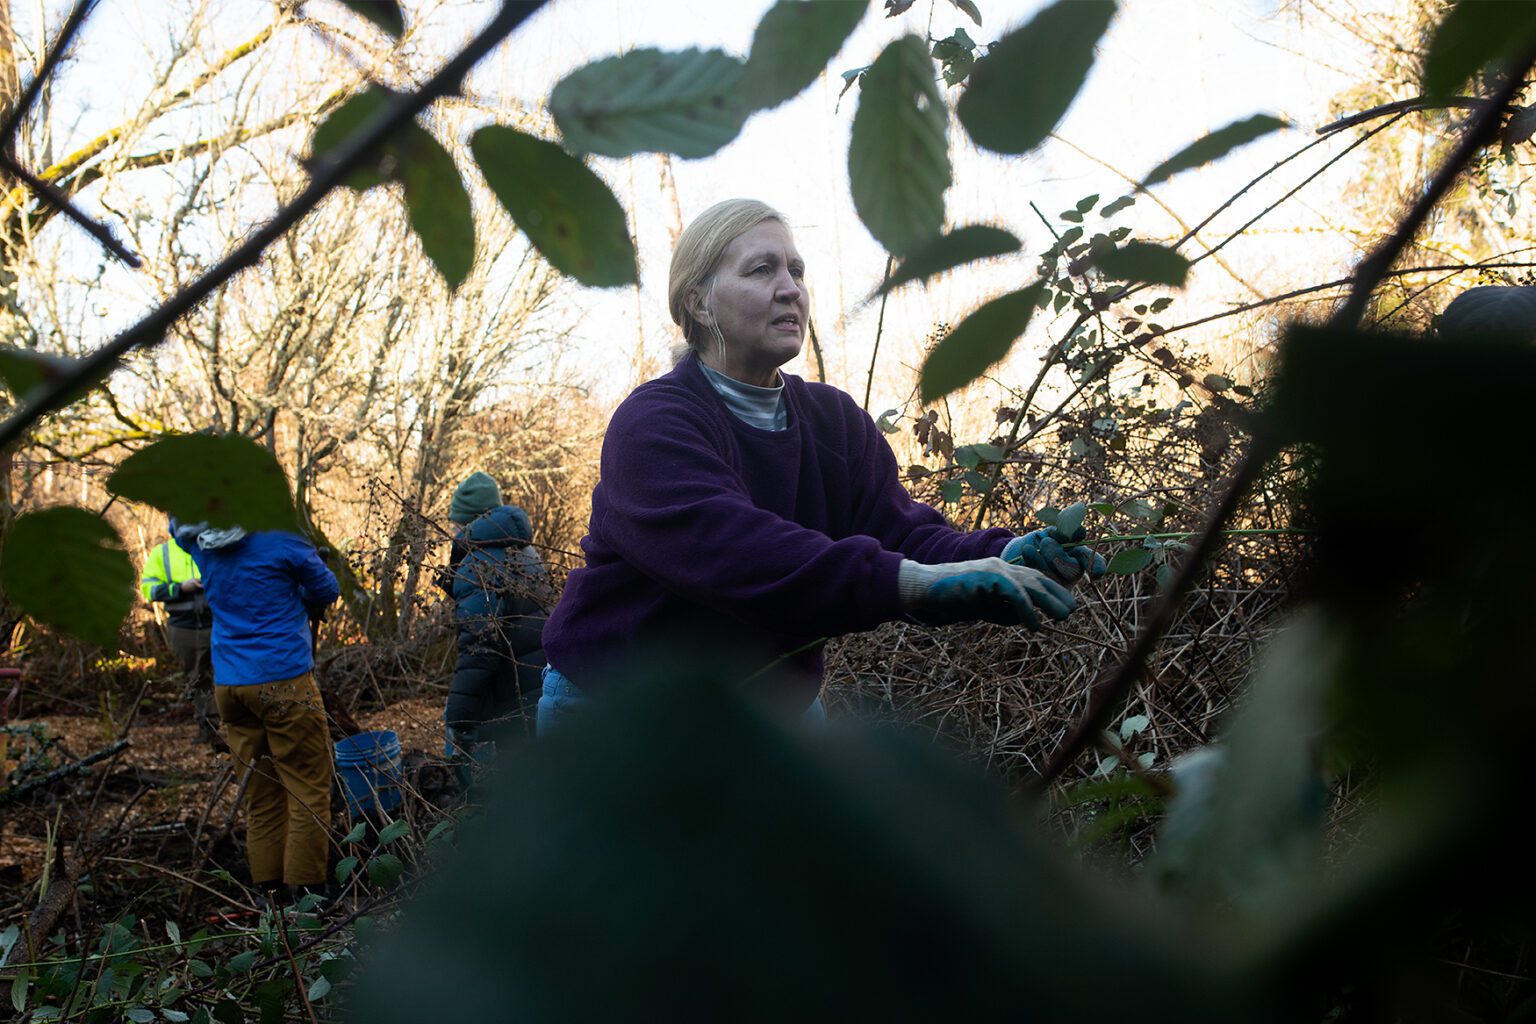 Volunteer Karen Grove removes the invasive species commonly known as Himalayan blackberry from East Meadow Park Jan. 28 in the Samish neighborhood. "I just wanted to get involved helping our community and to get to know the parks